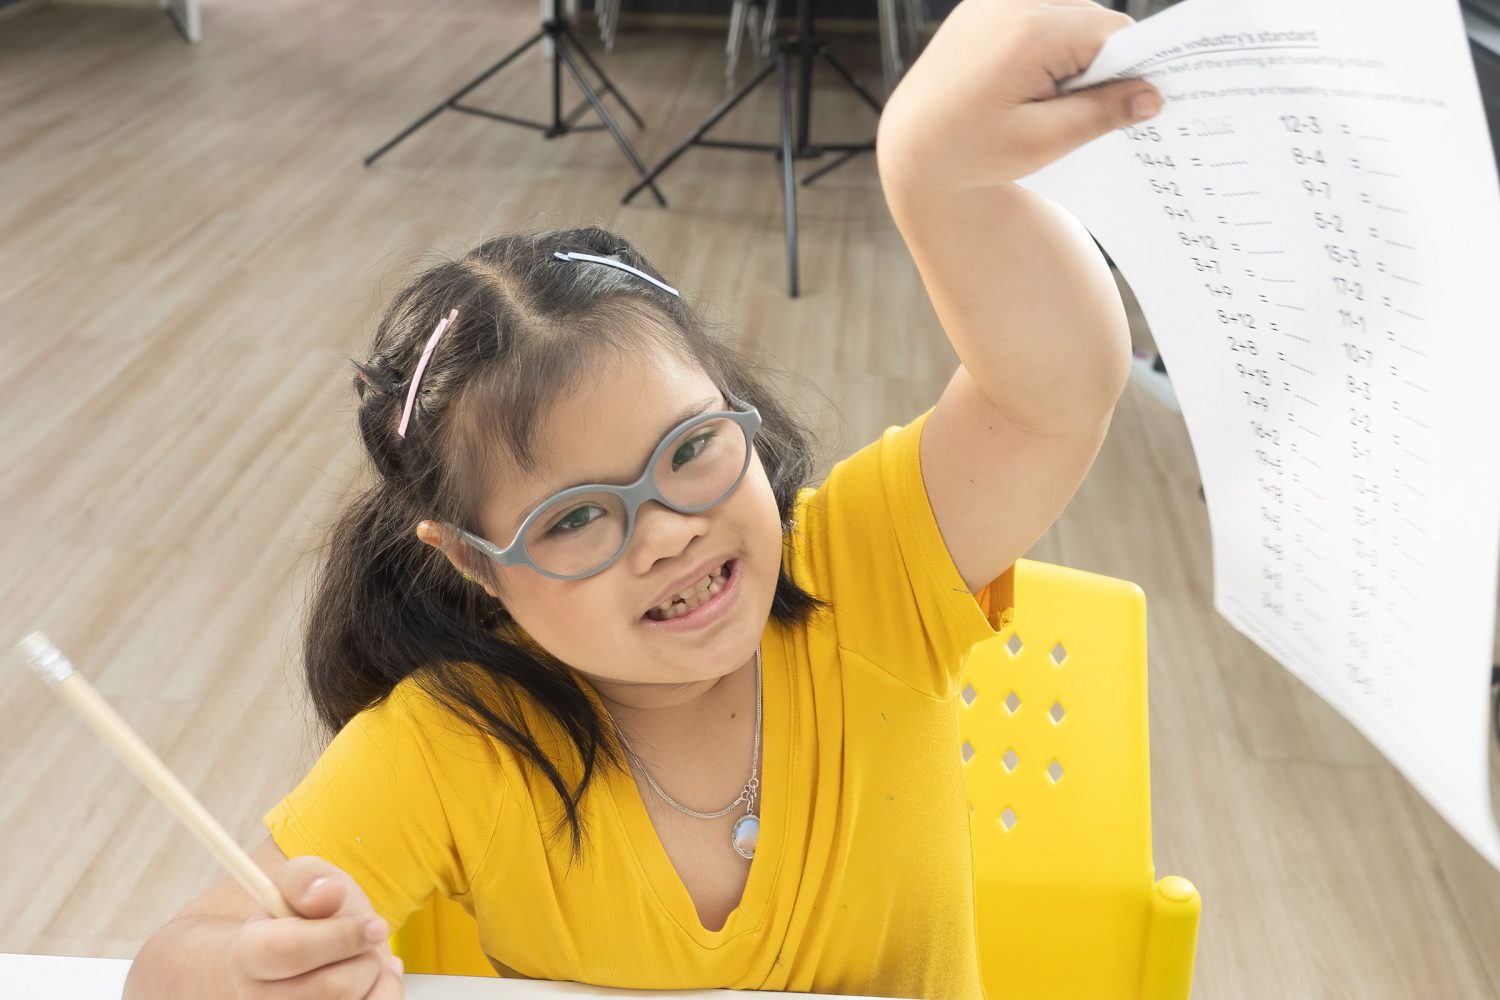 Girl with Down syndrome proudly holds up her math worksheet